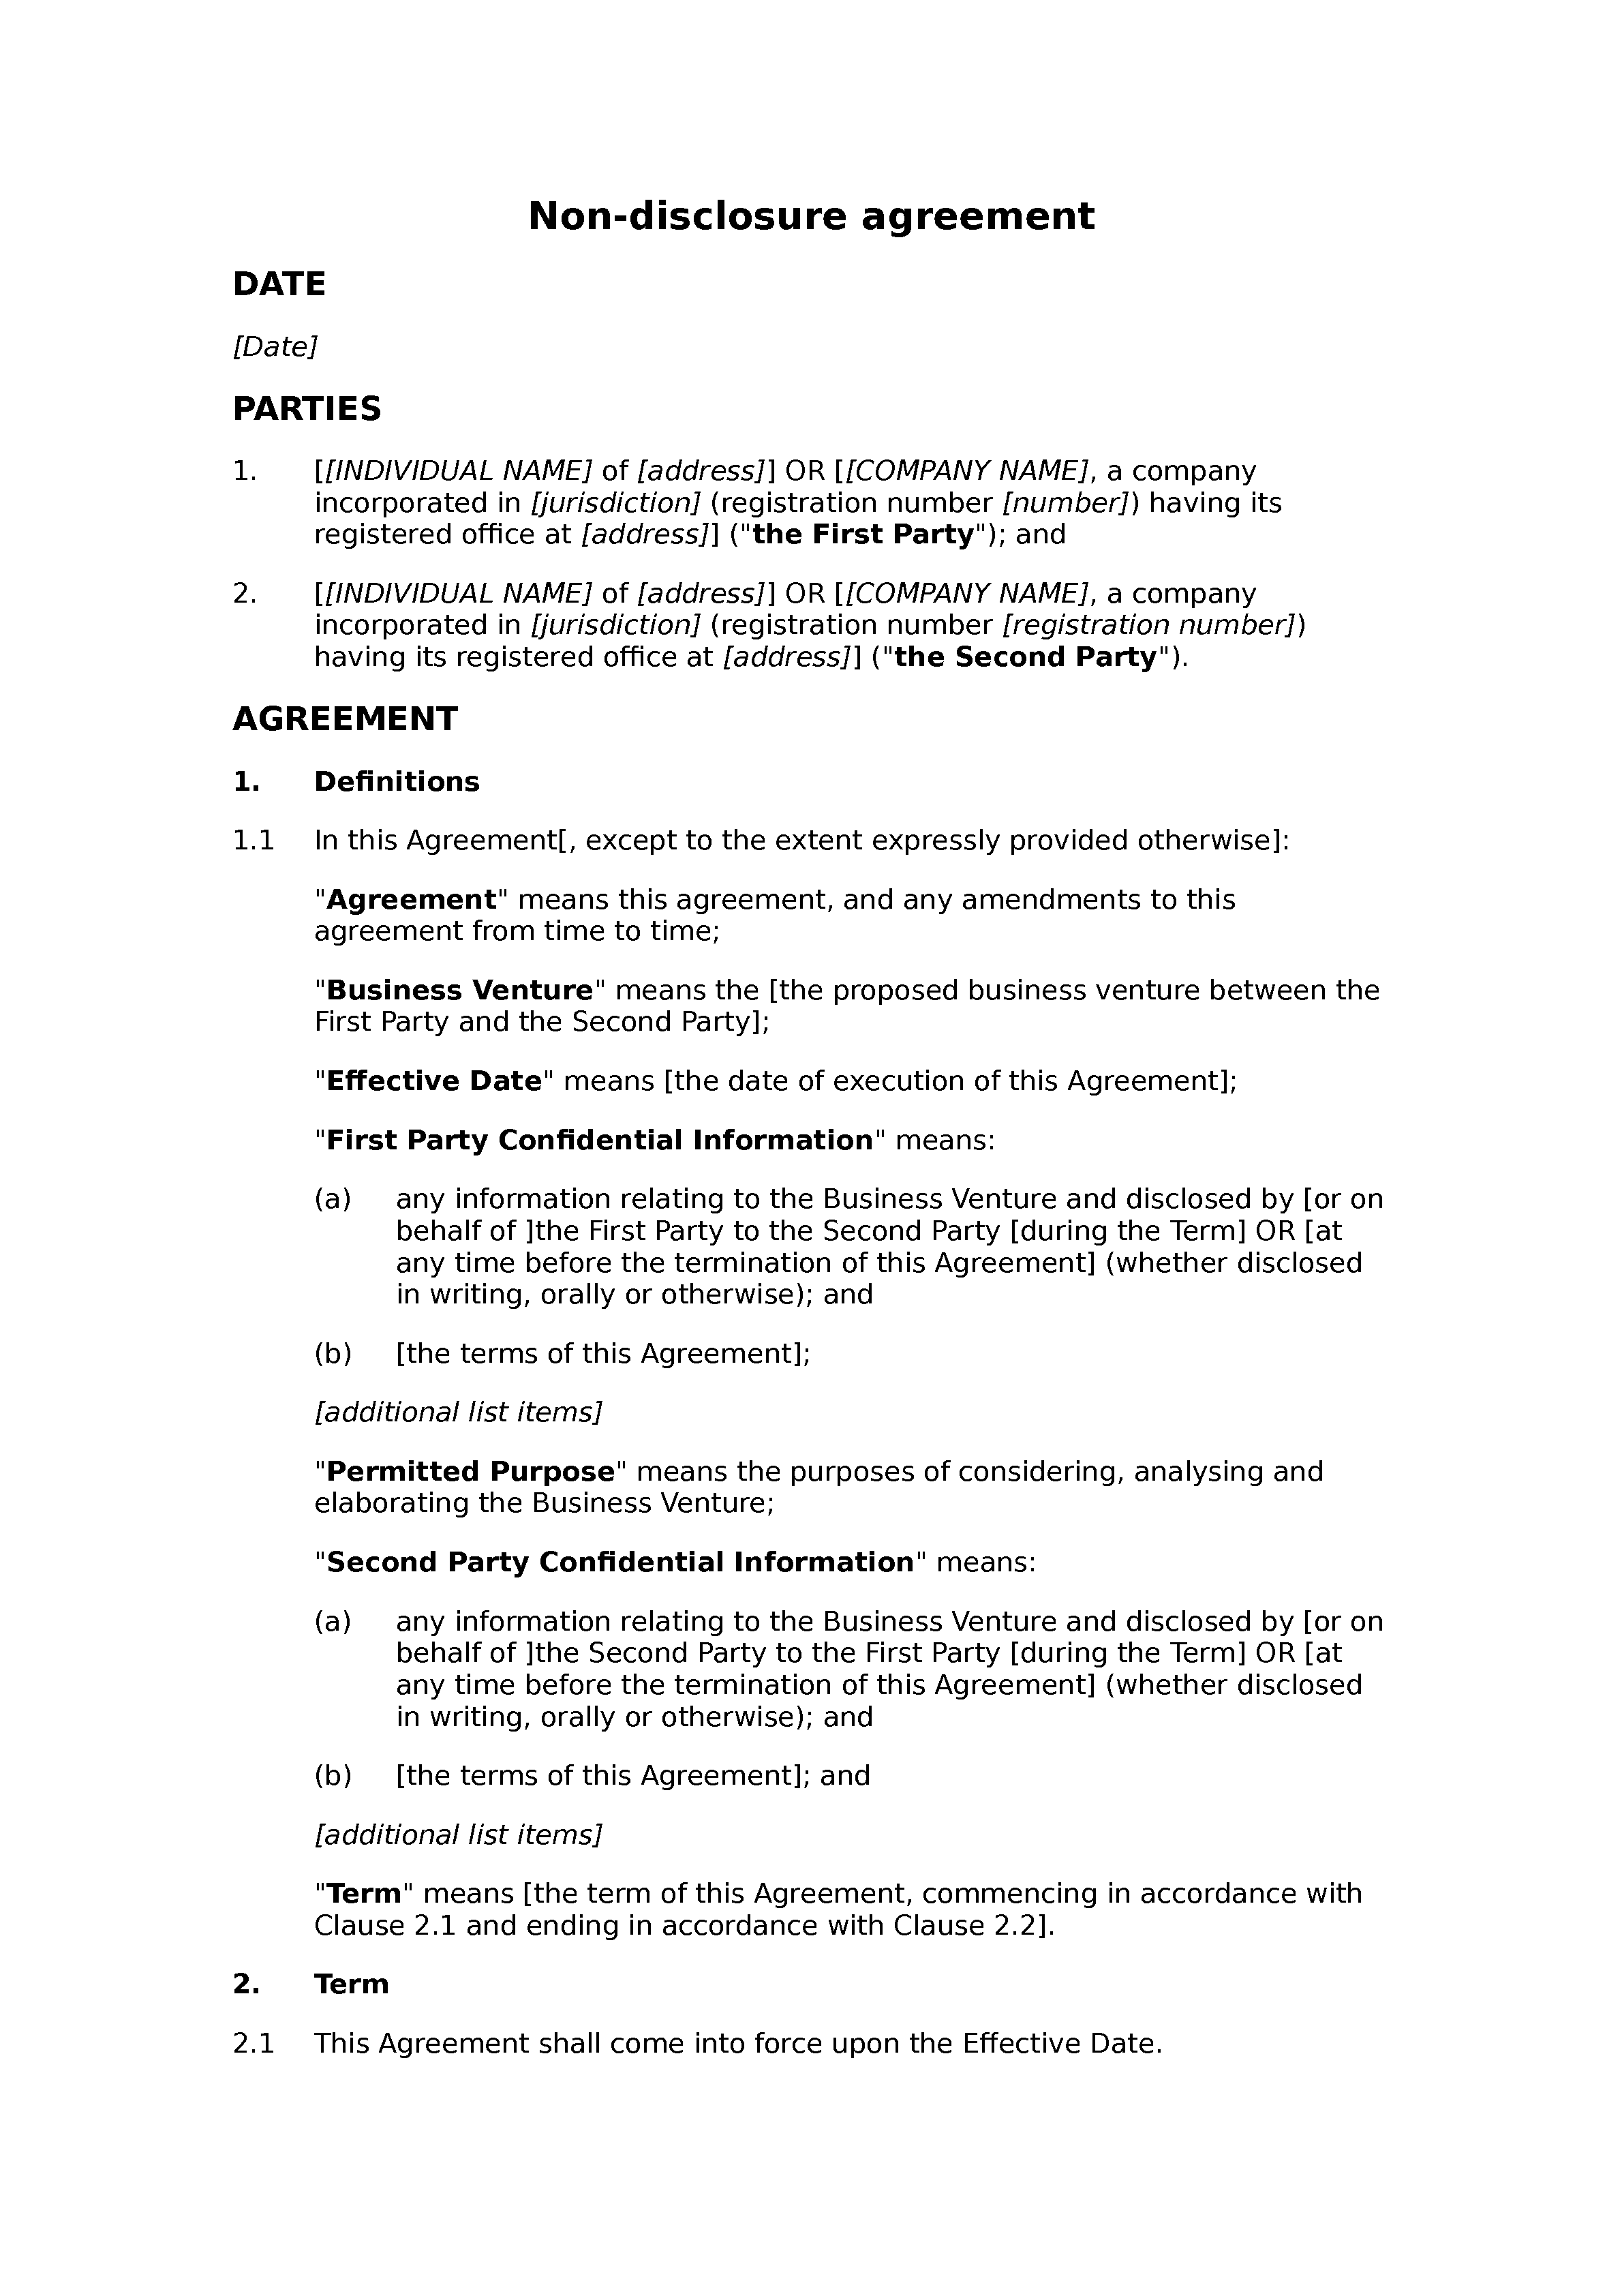 Non-disclosure agreement (business venture) document preview